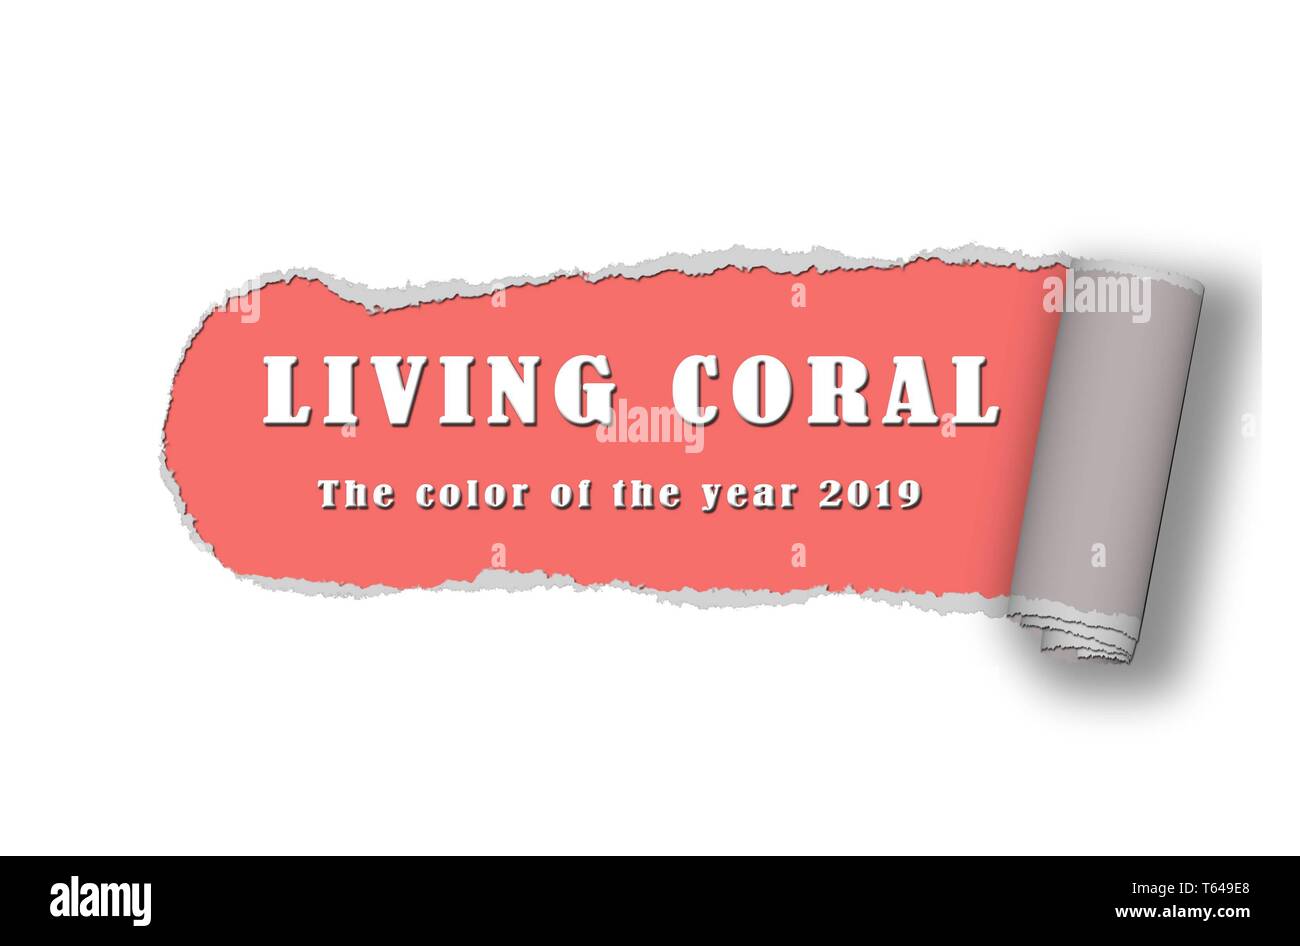 Text - Colour of the year 2019, Living Coral - on white ripped paper background Stock Photo